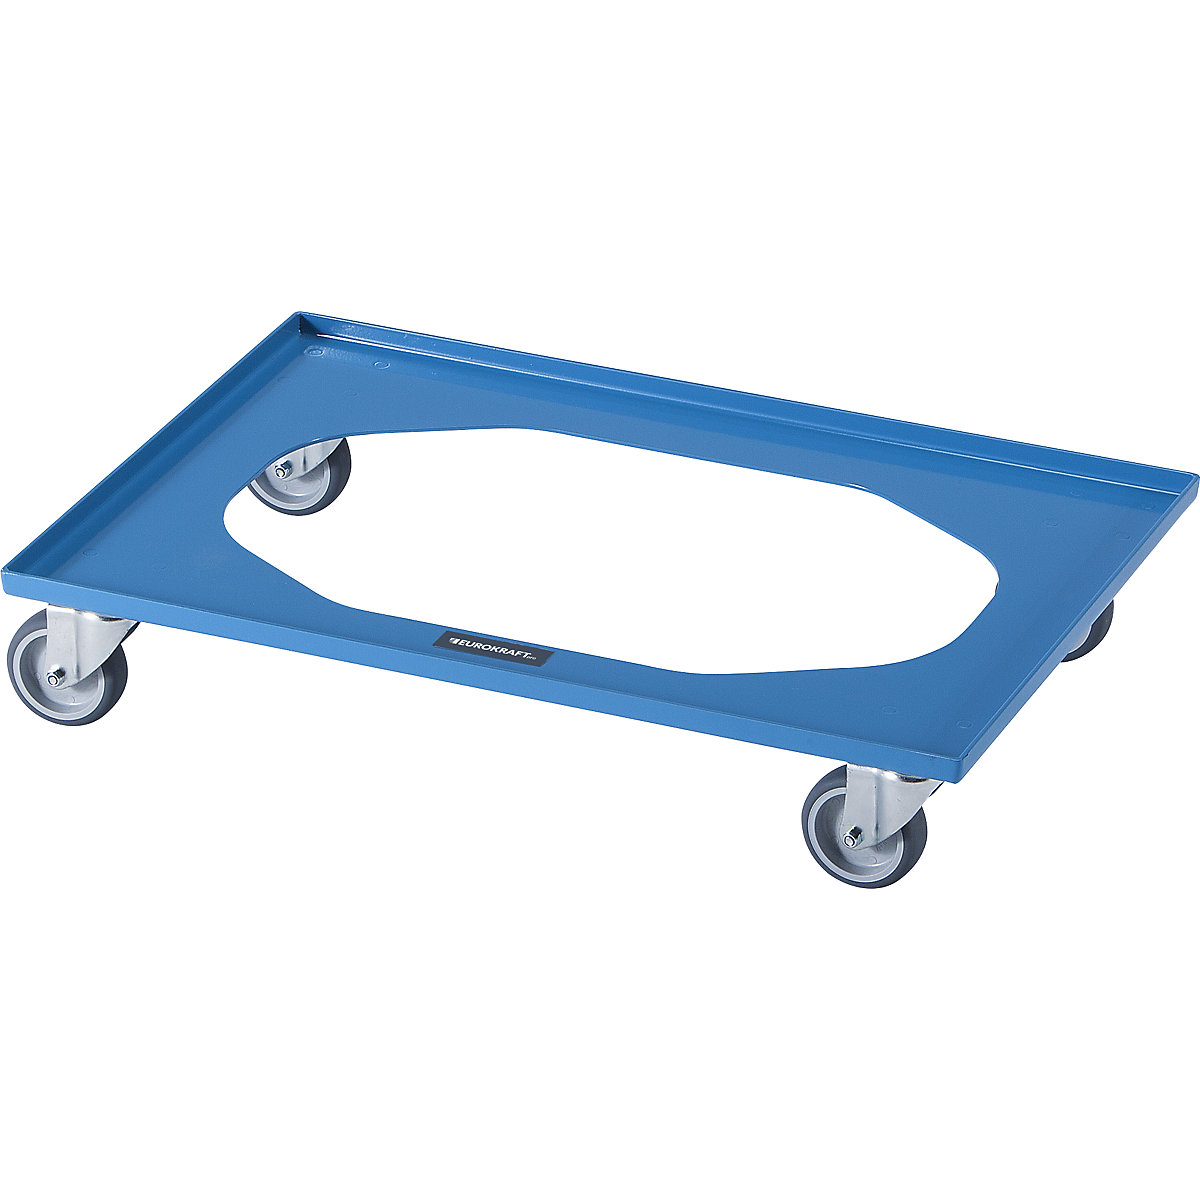 NEO transport dolly – eurokraft pro, for Euro formats 600 x 400 mm, max. load 250 kg, 5+ items-6